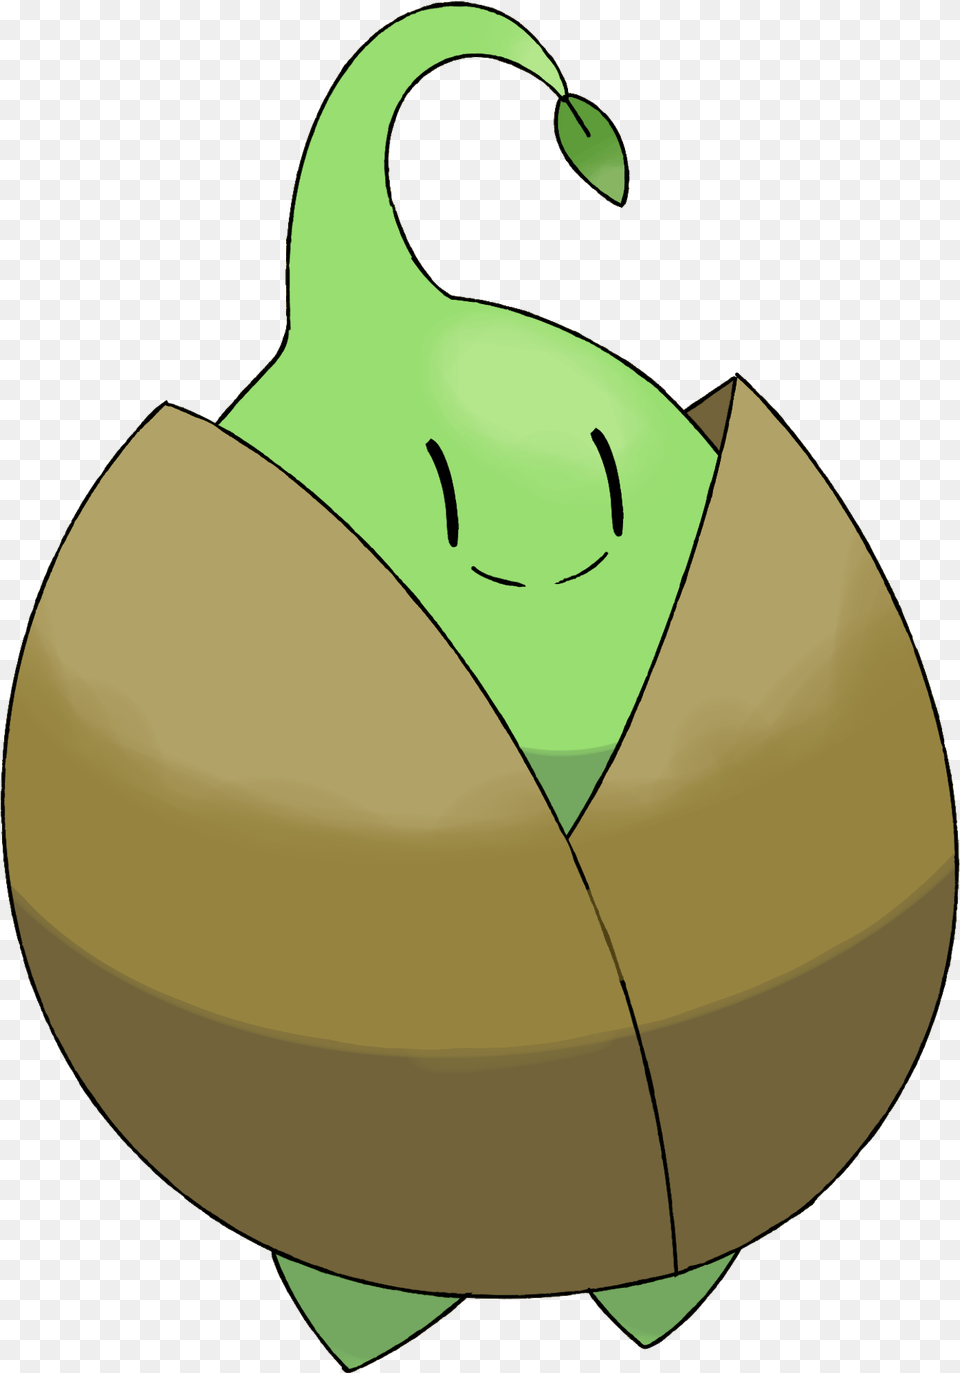 Darkandwindie Fakemon Wiki Seed Ling, Food, Nut, Plant, Produce Png Image